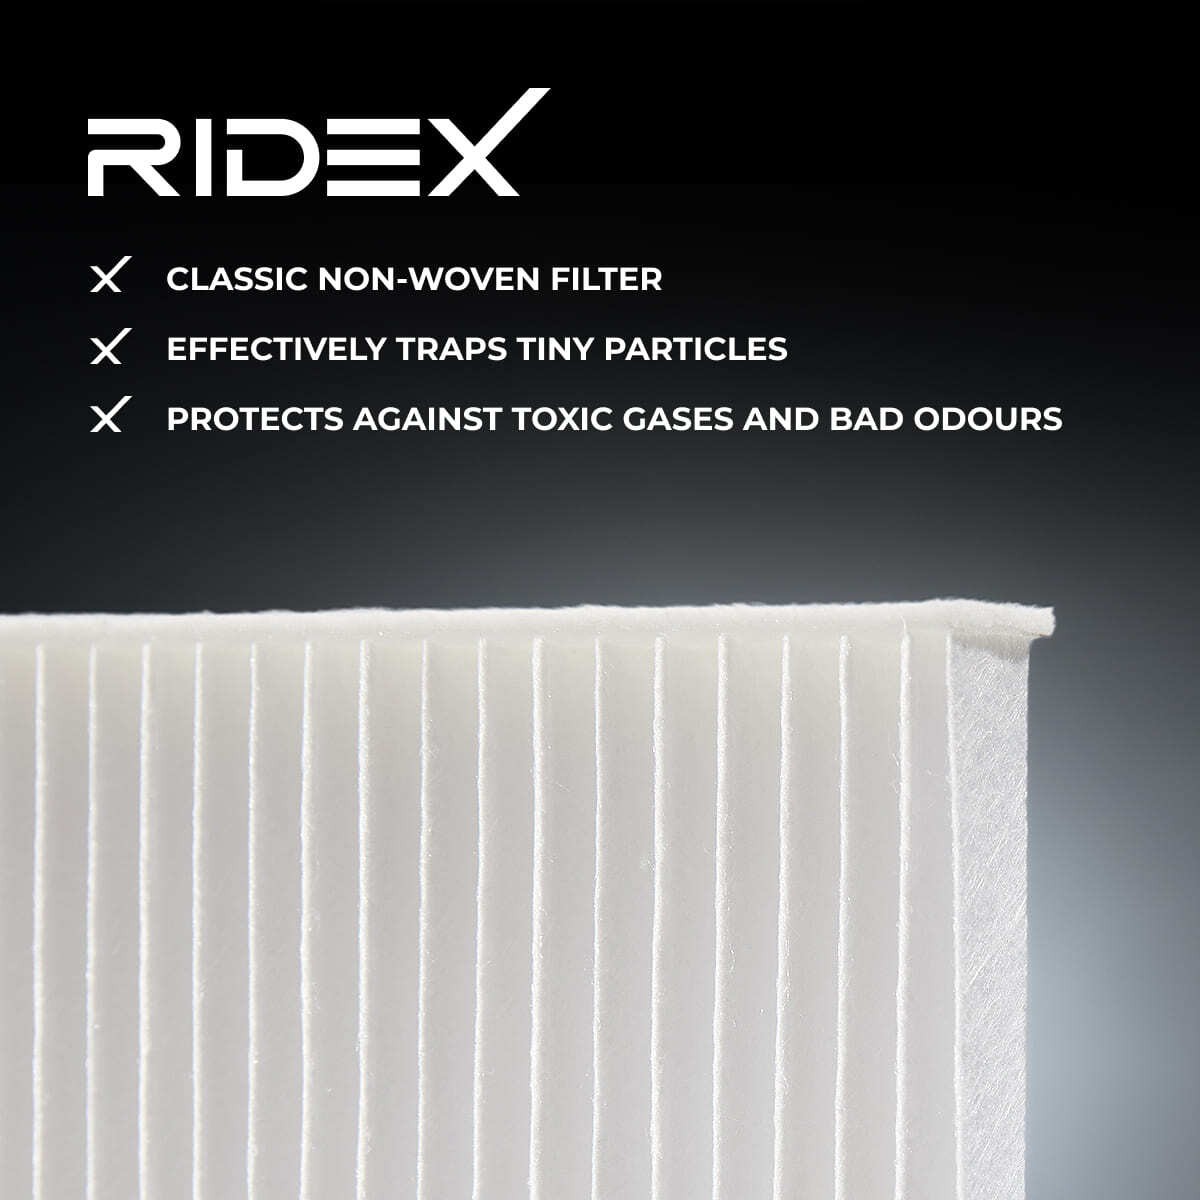 424I0169 Air con filter 424I0169 RIDEX Particulate Filter, 235 mm x 223 mm x 18 mm